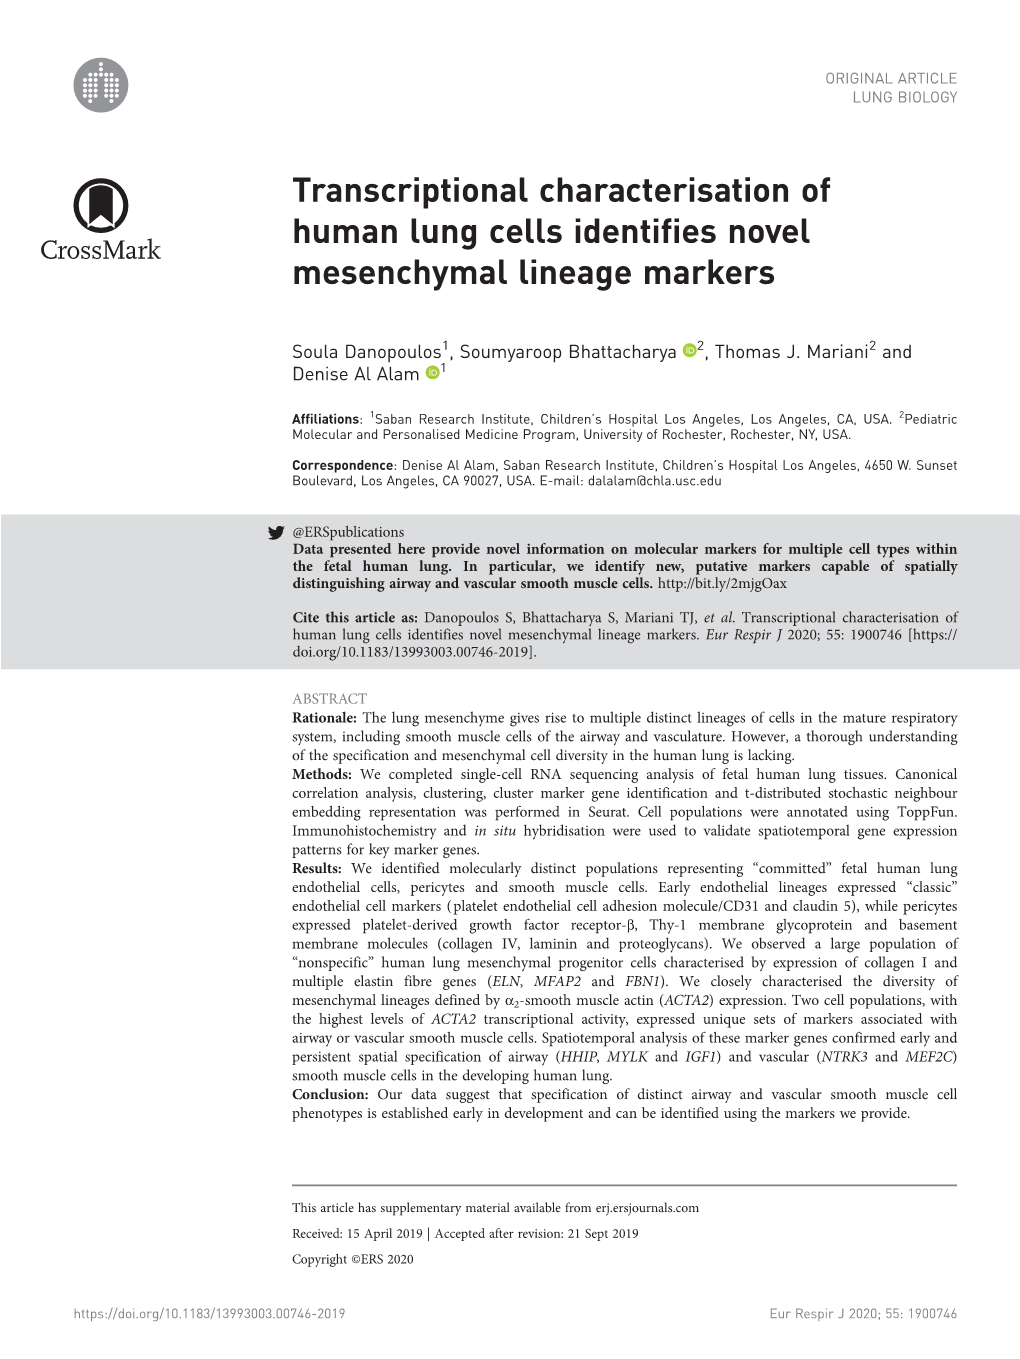 Transcriptional Characterisation of Human Lung Cells Identifies Novel Mesenchymal Lineage Markers